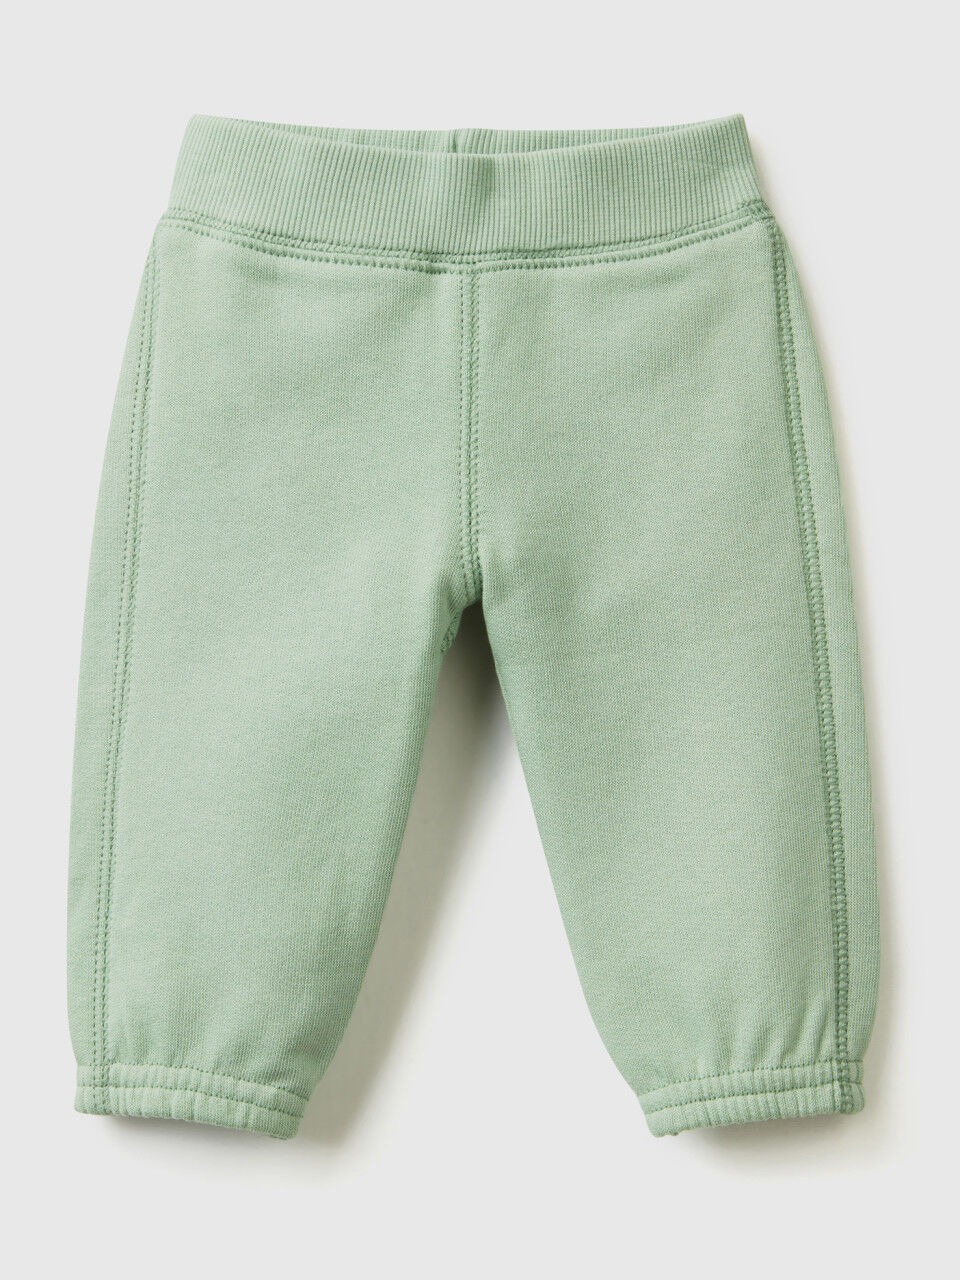 Soft sweatpants with embroidery